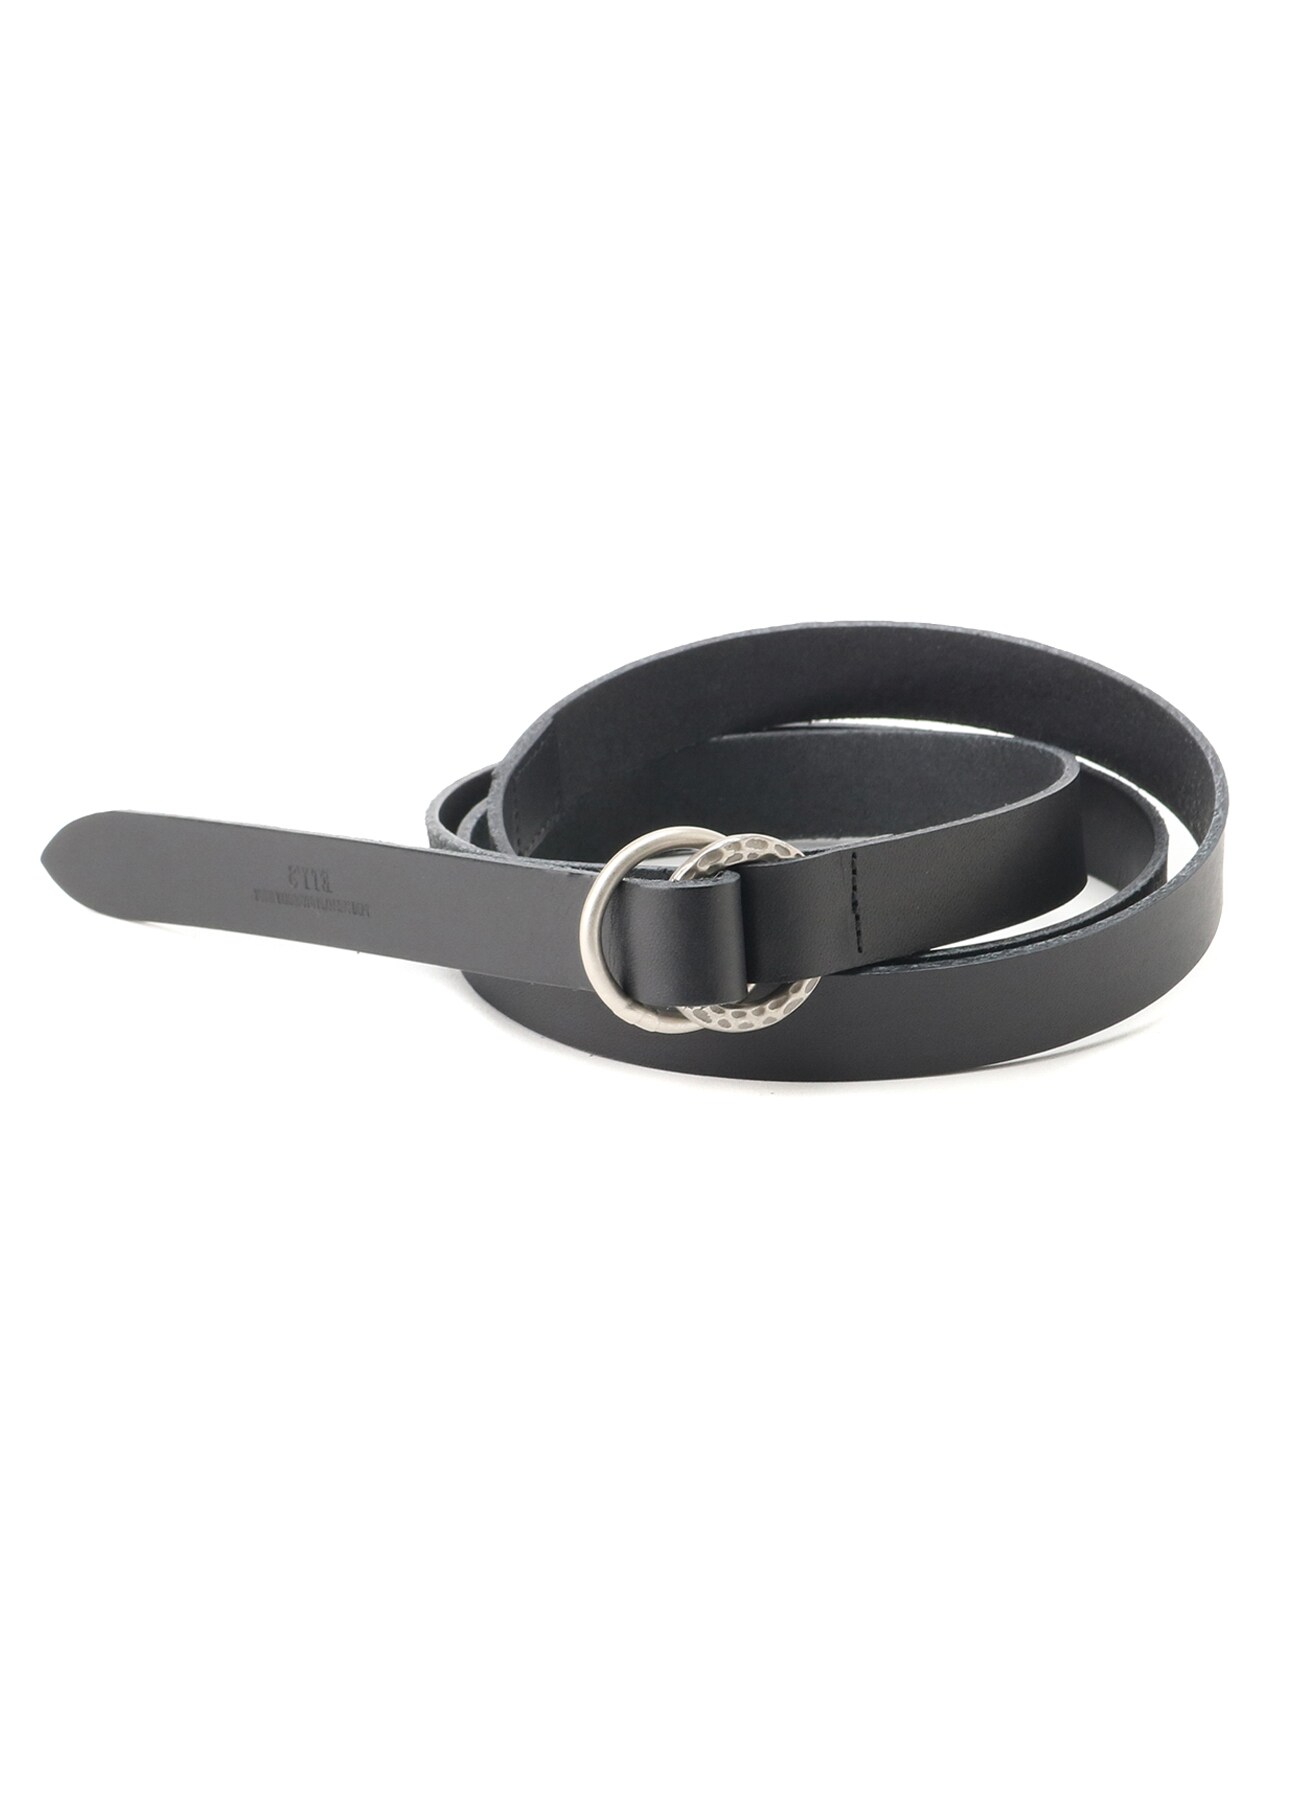 Cow Leather 22mm Long Embossed RingBelt